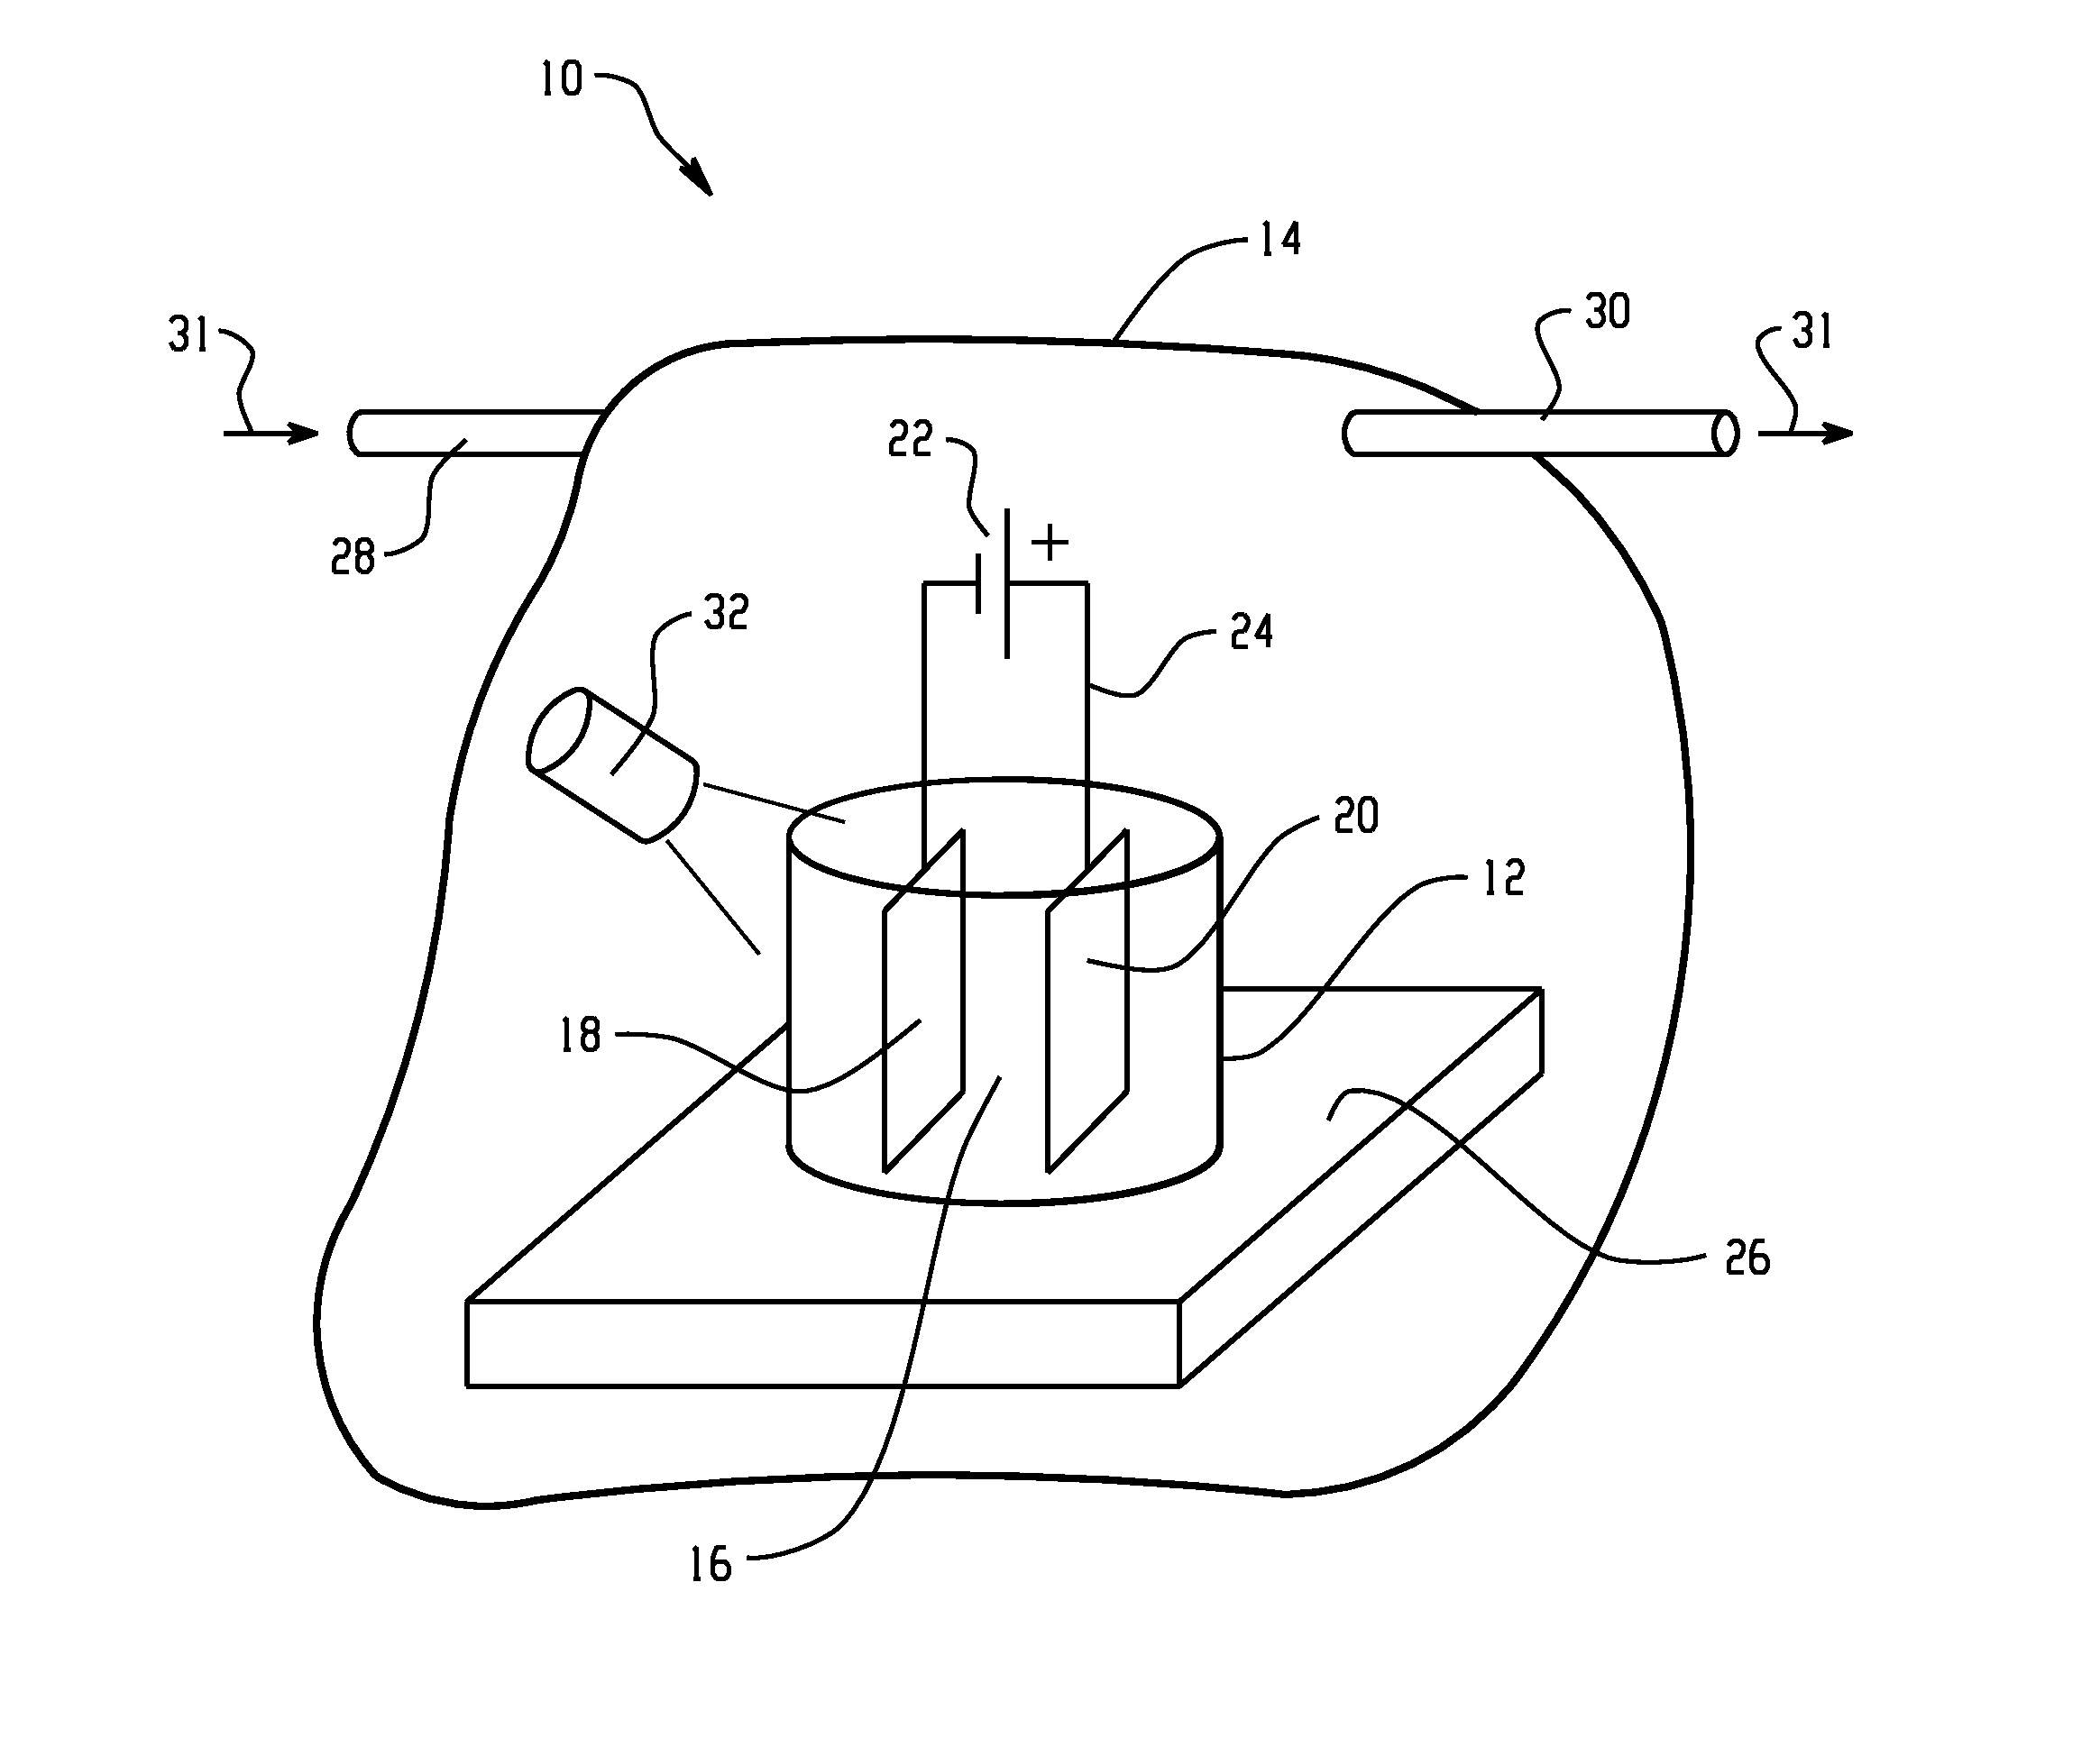 Methods and materials for electroplating aluminum in ionic liquids